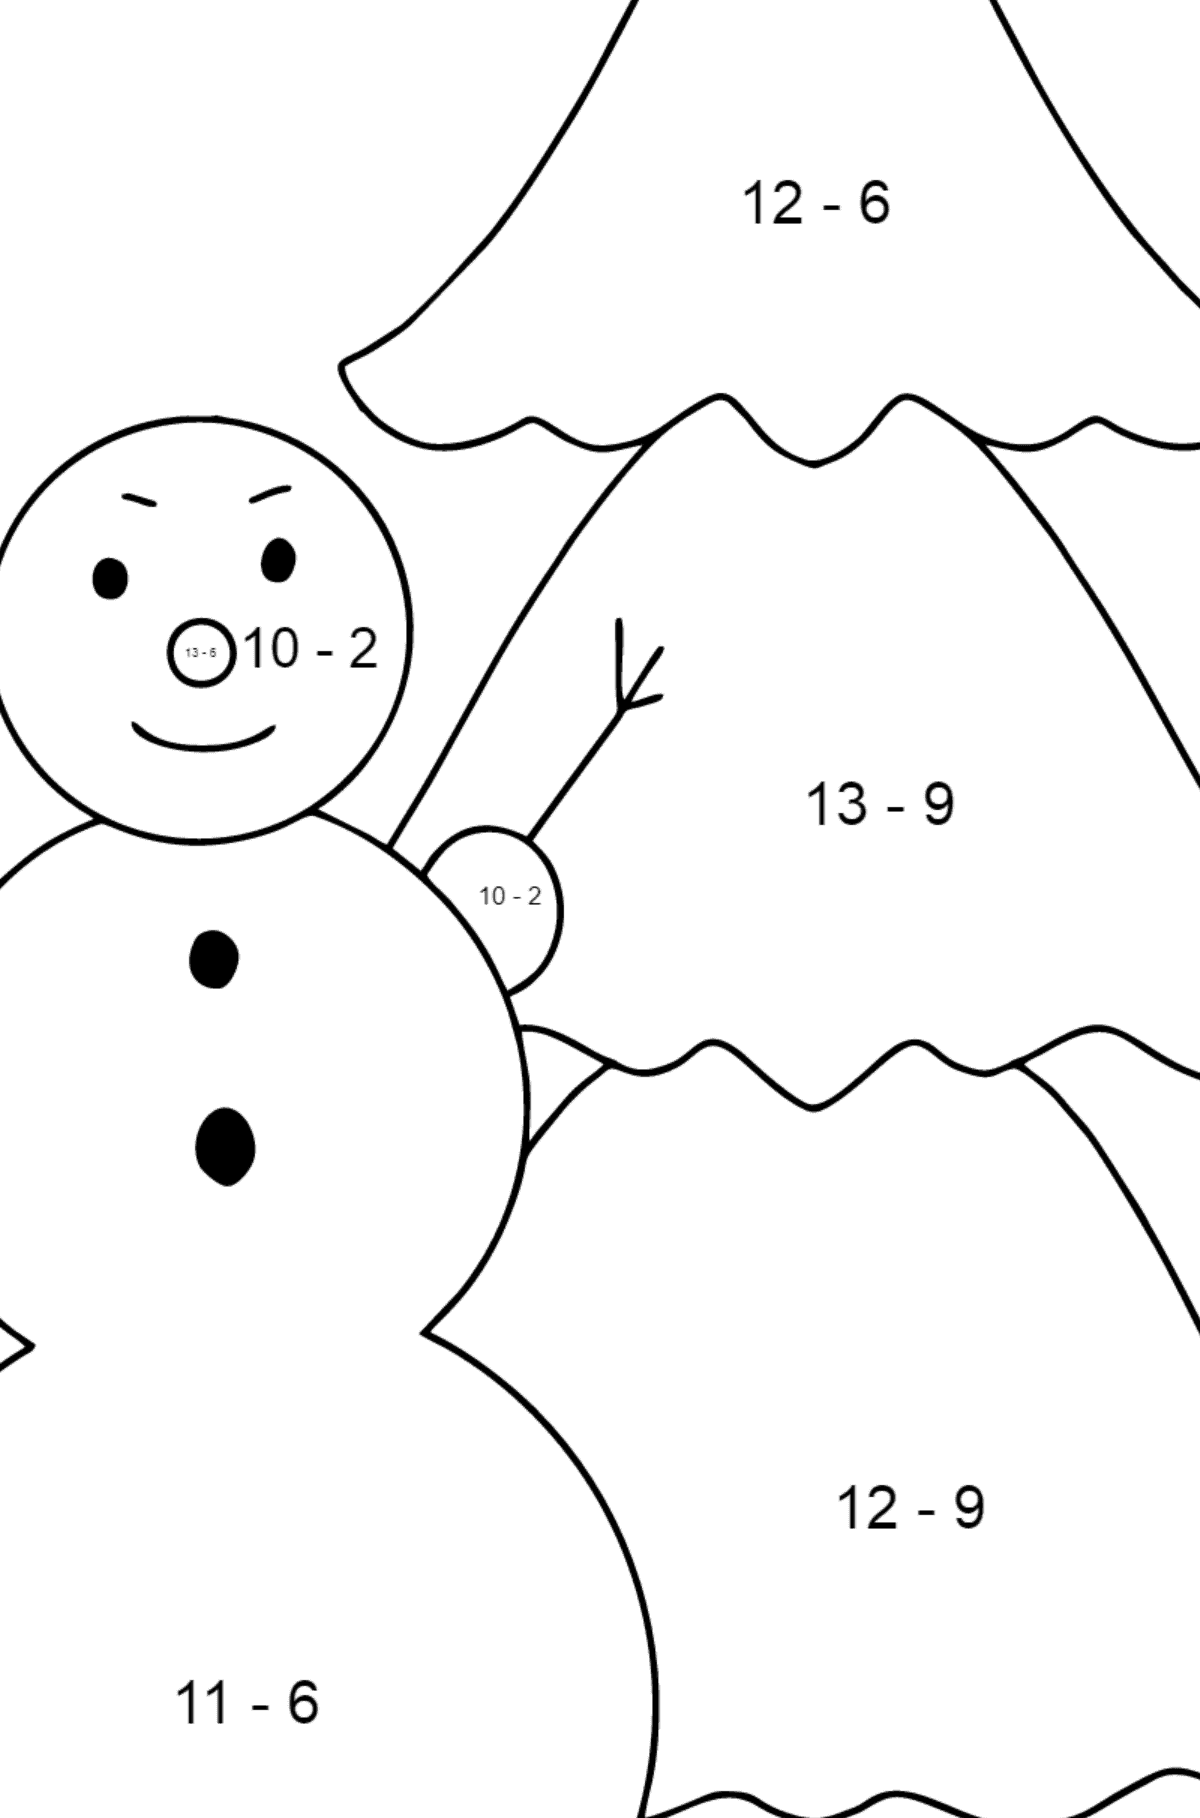 Snowman coloring page for kids - Math Coloring - Subtraction for Kids